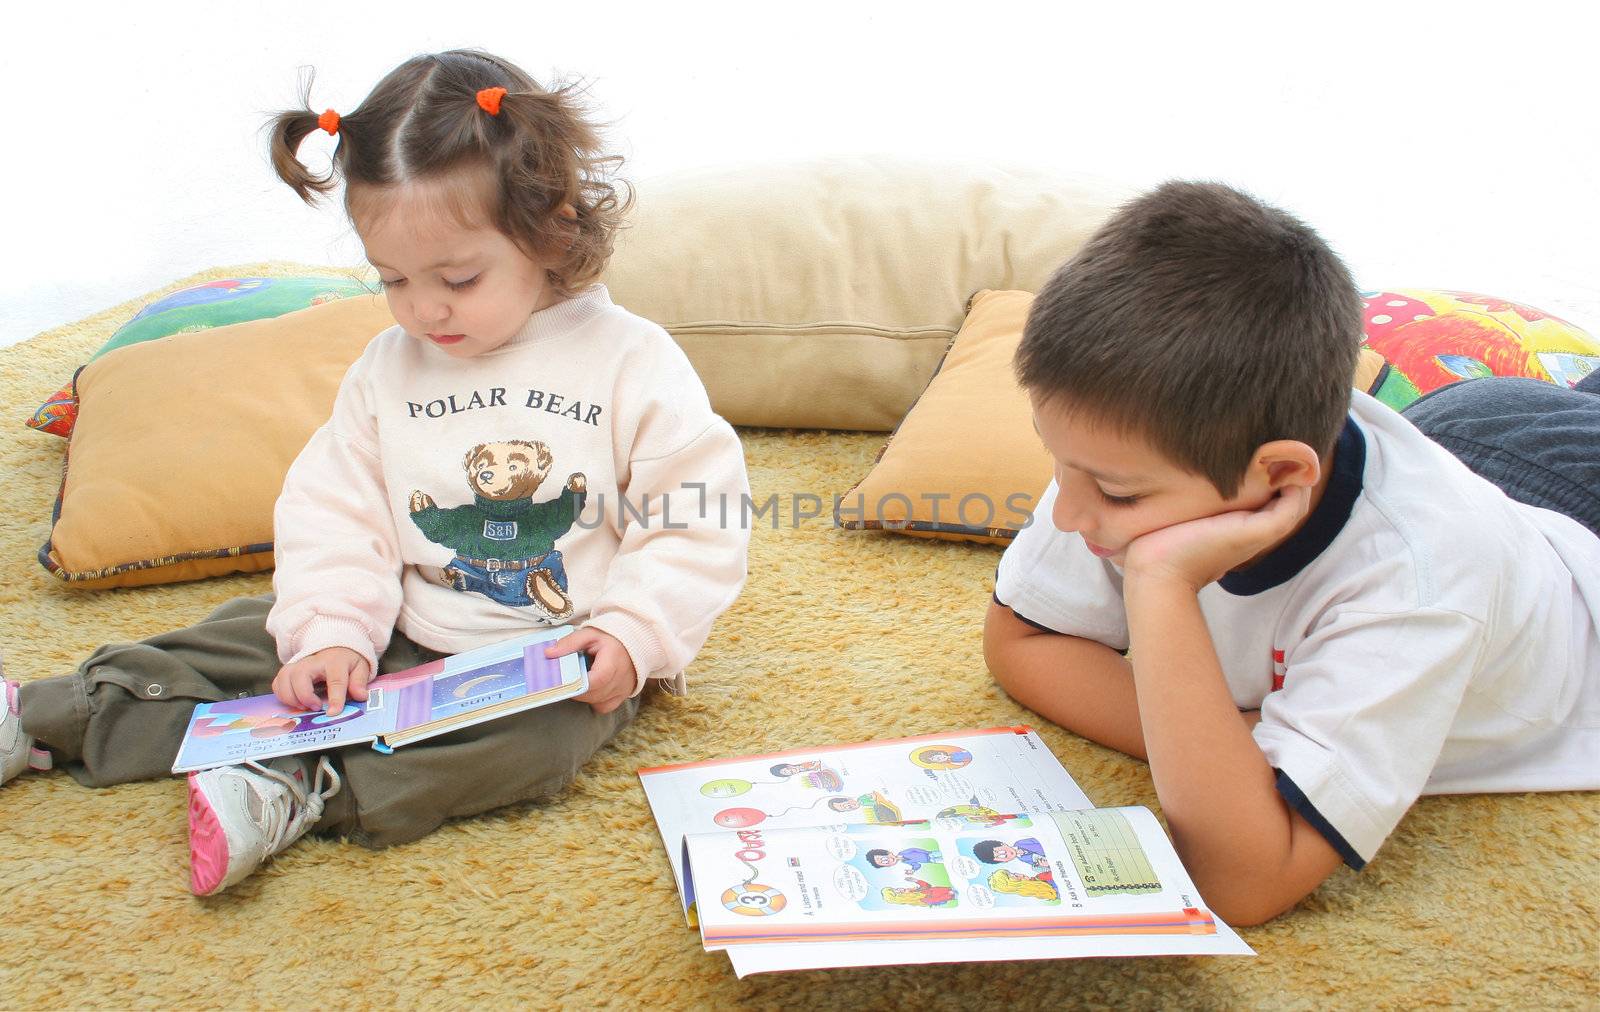 Brother and sister reading books on the floor by Erdosain